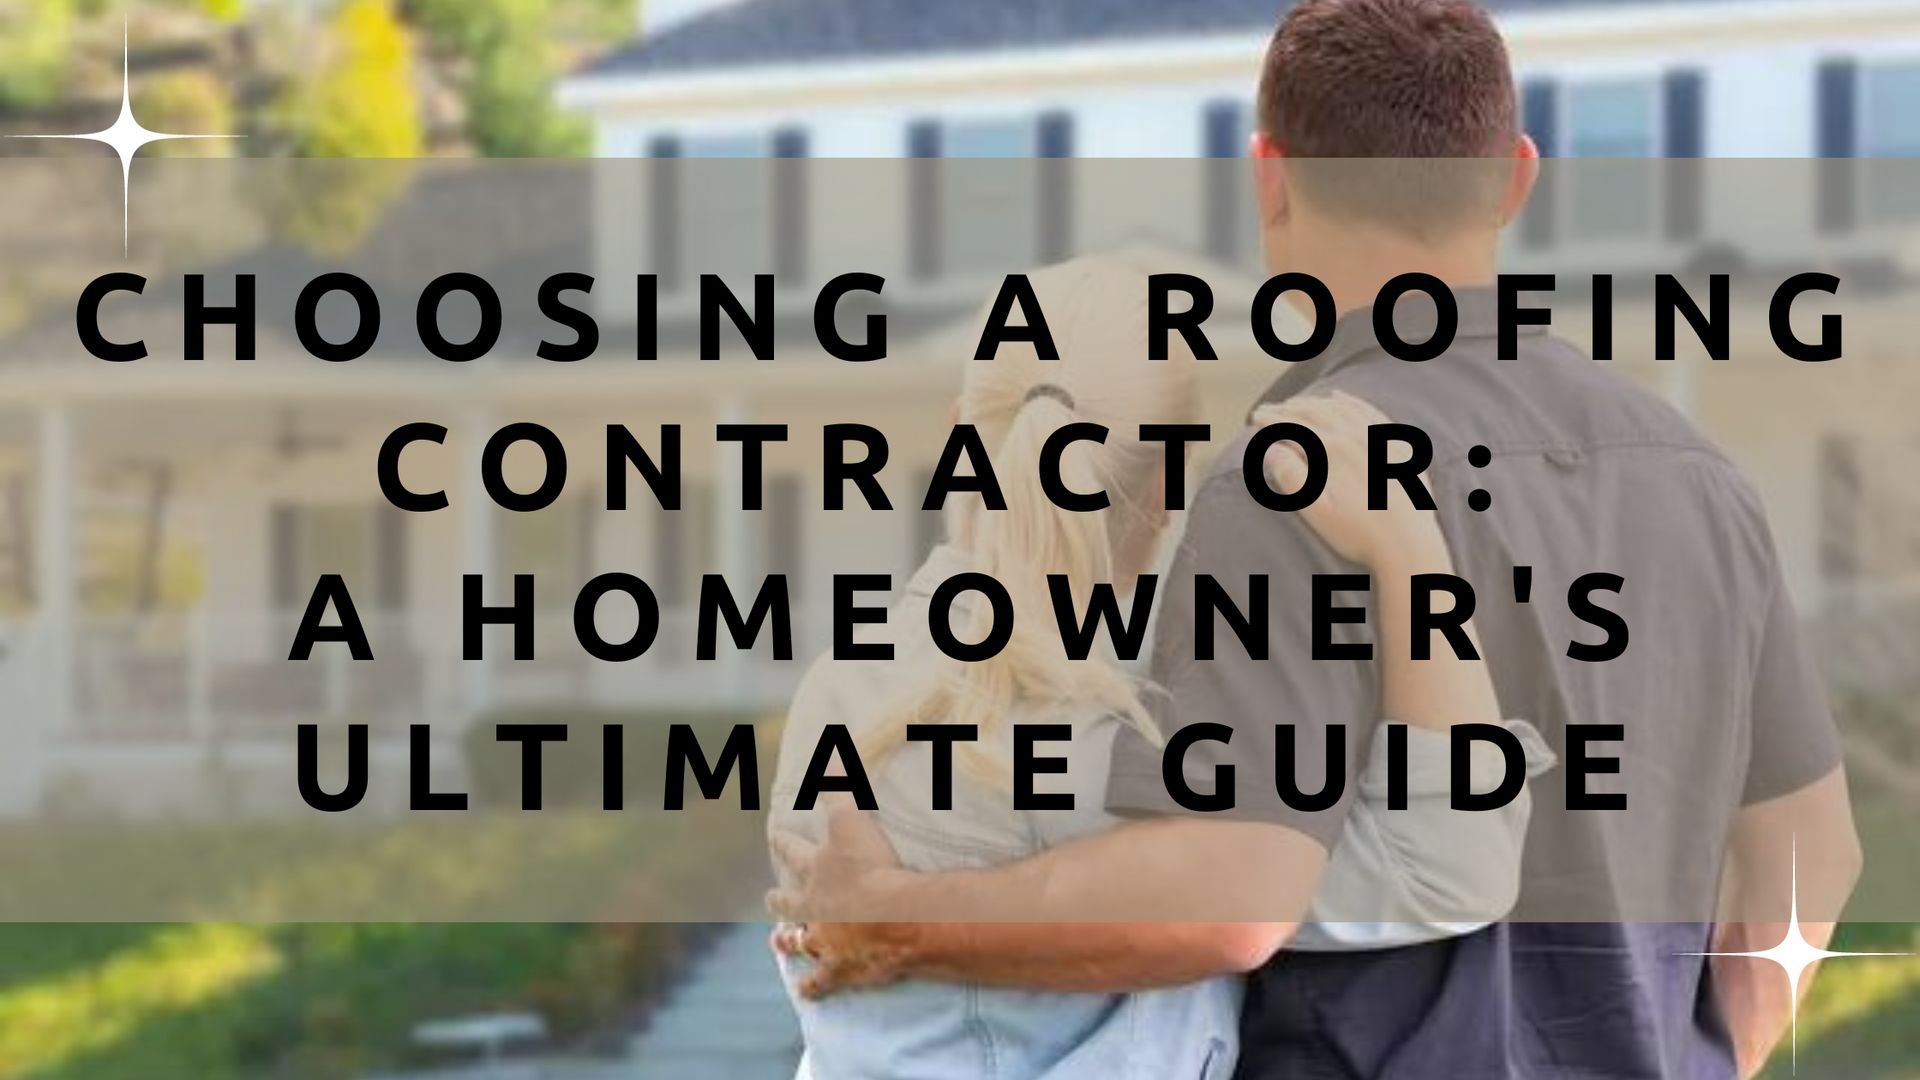 How to Find the correct roofing contractor